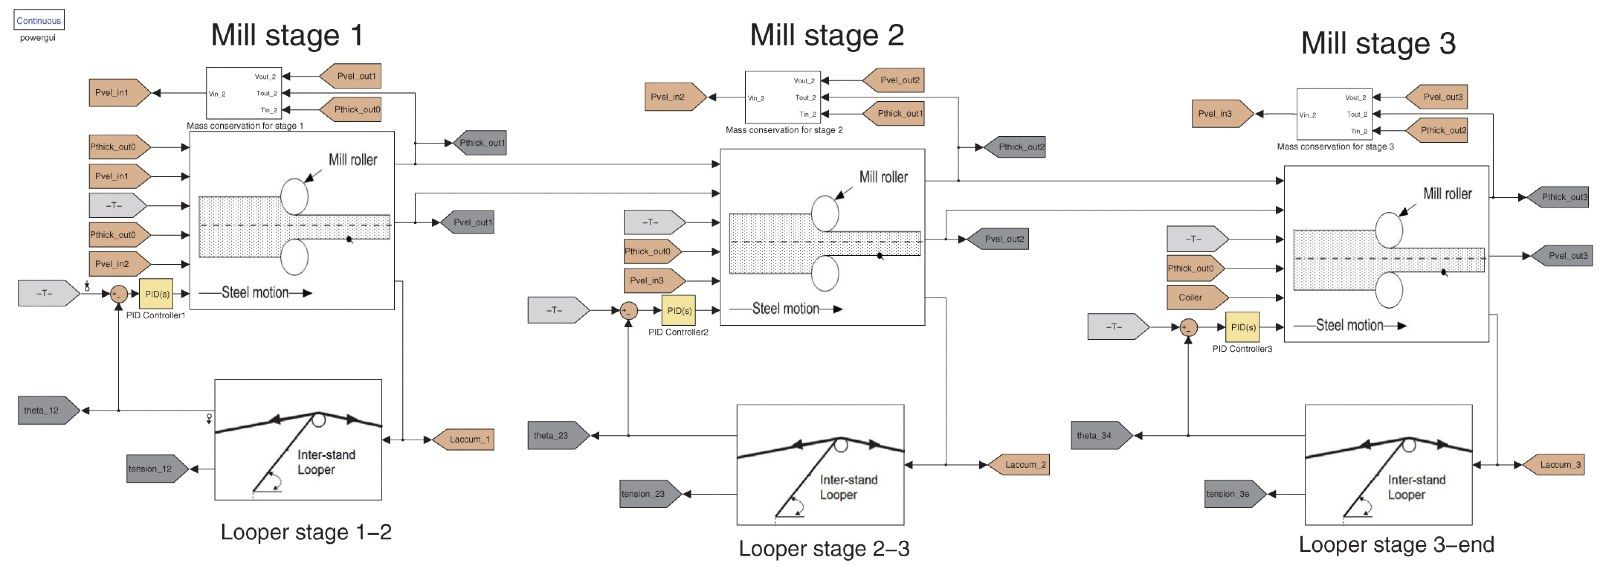 Simulink model showing multiple rolling mill stages with inter-stand looper stages